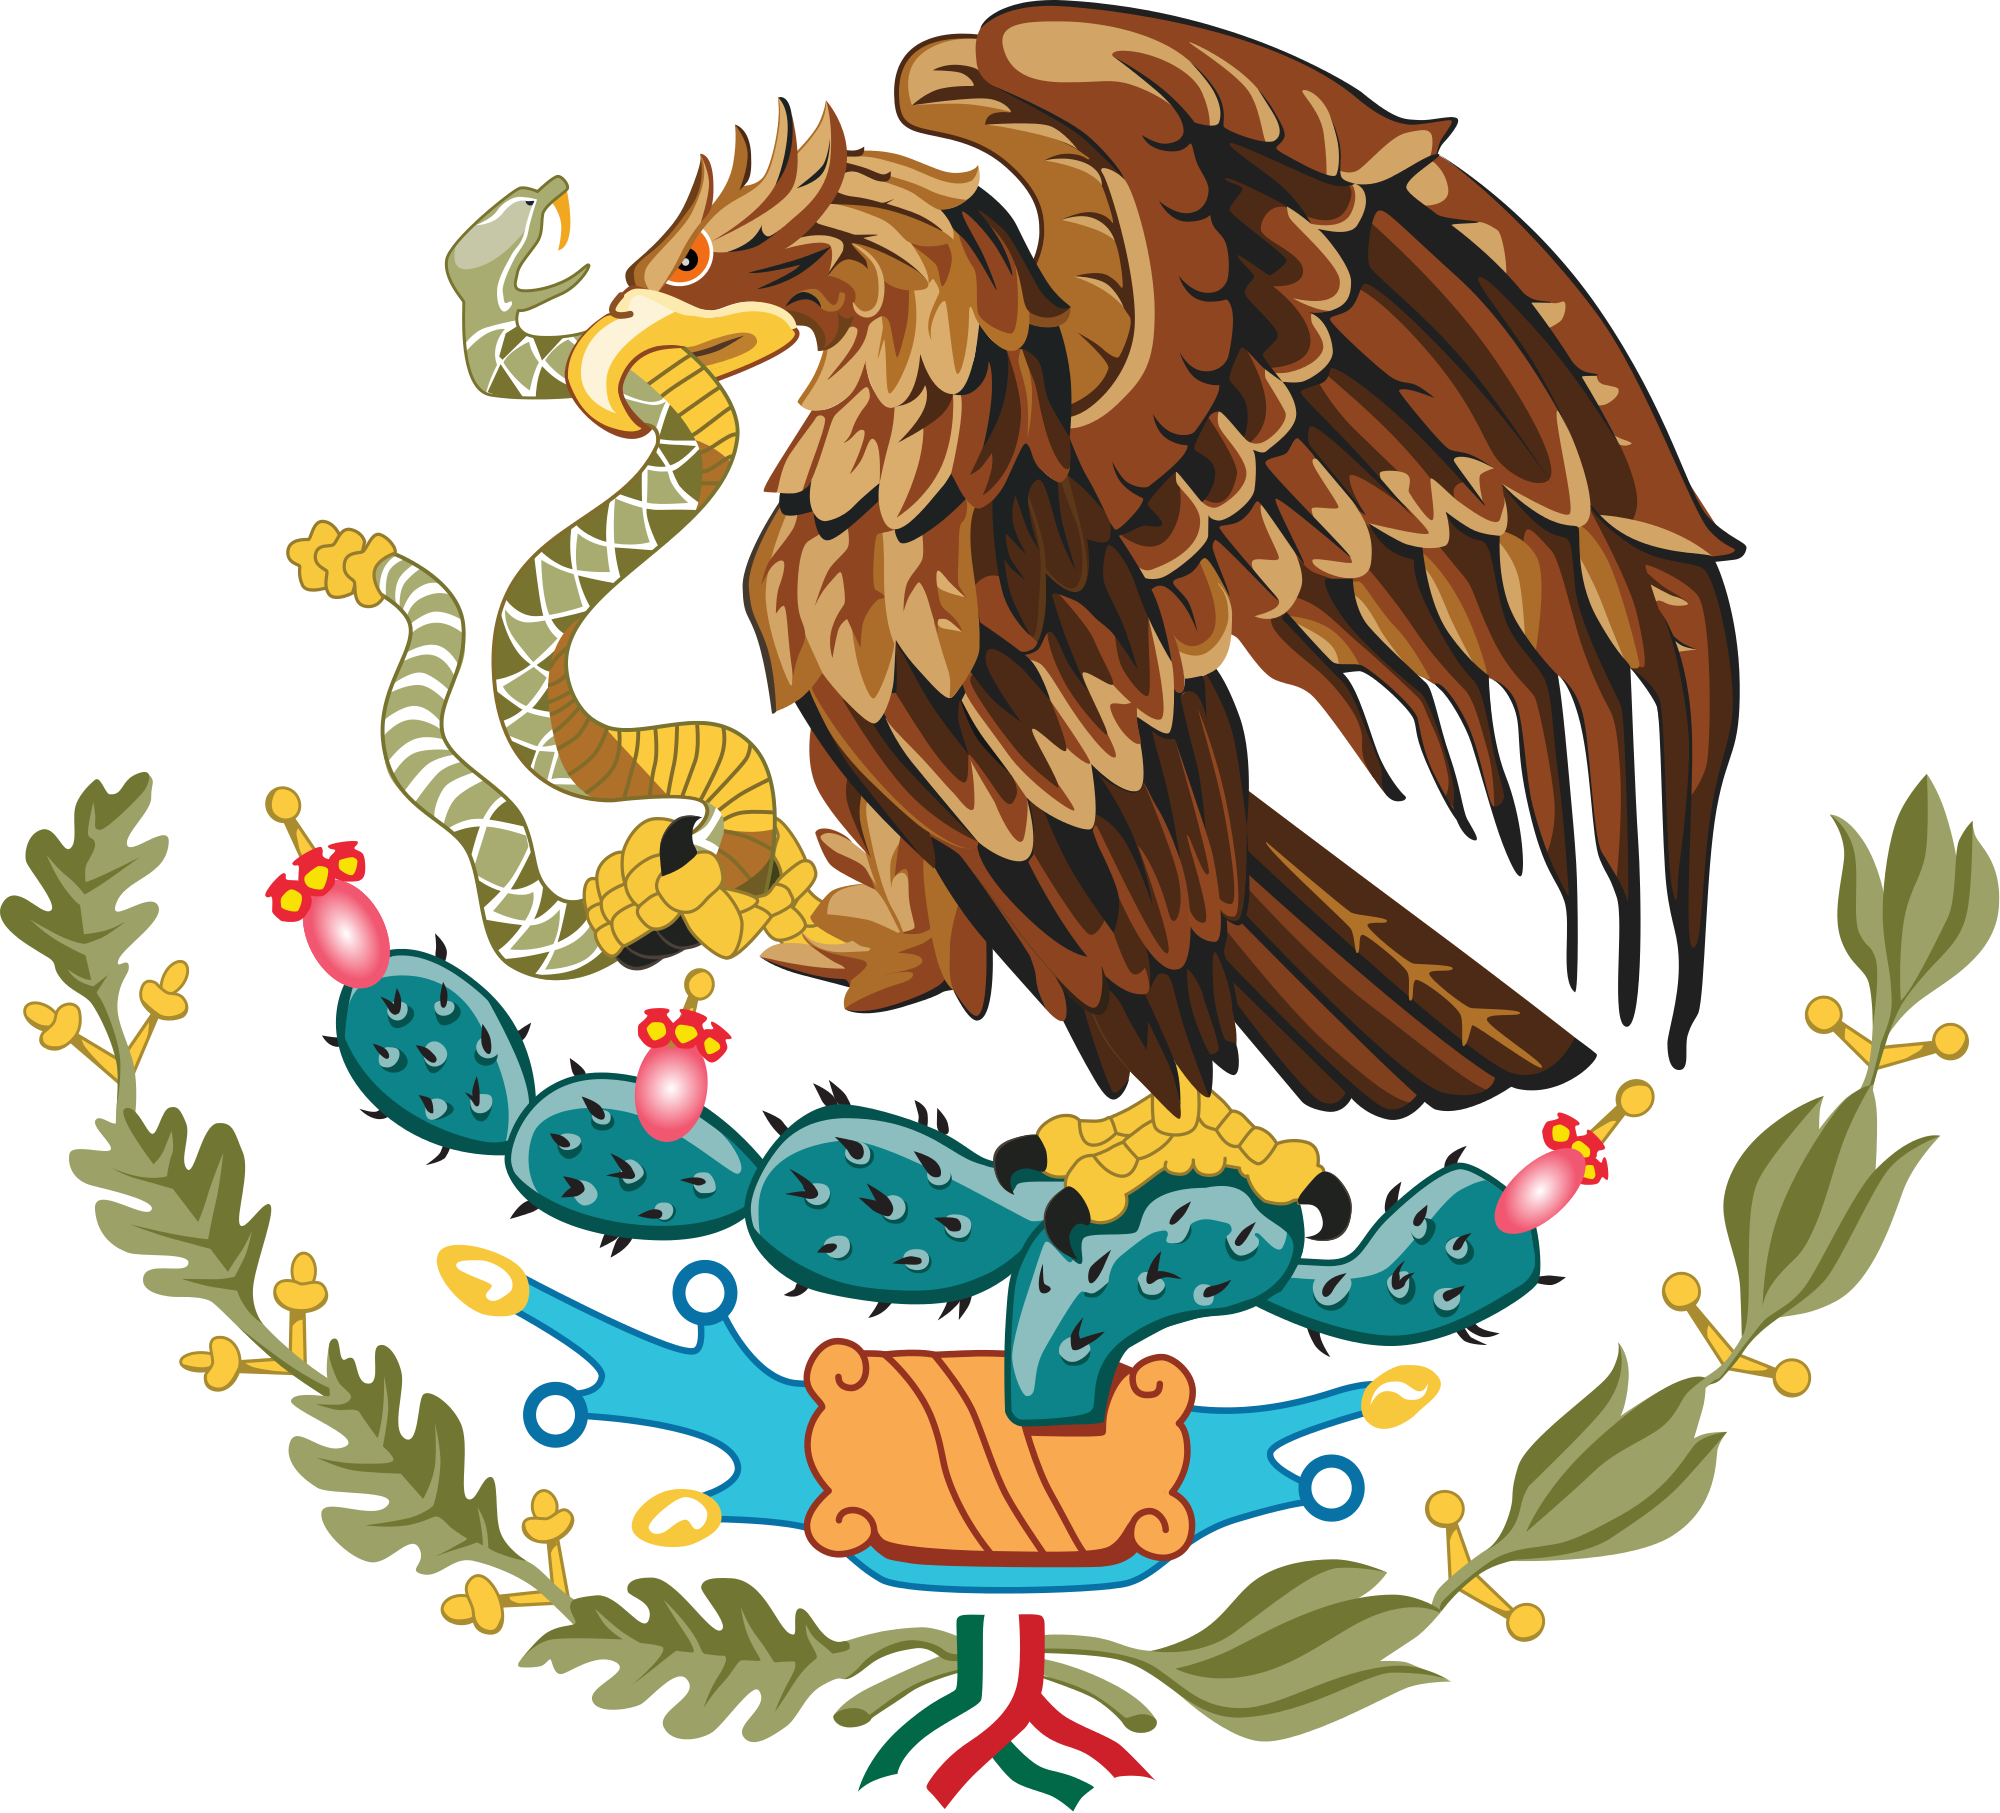 Coat of arms of Mexico - Wikipedia, the free encyclopedia